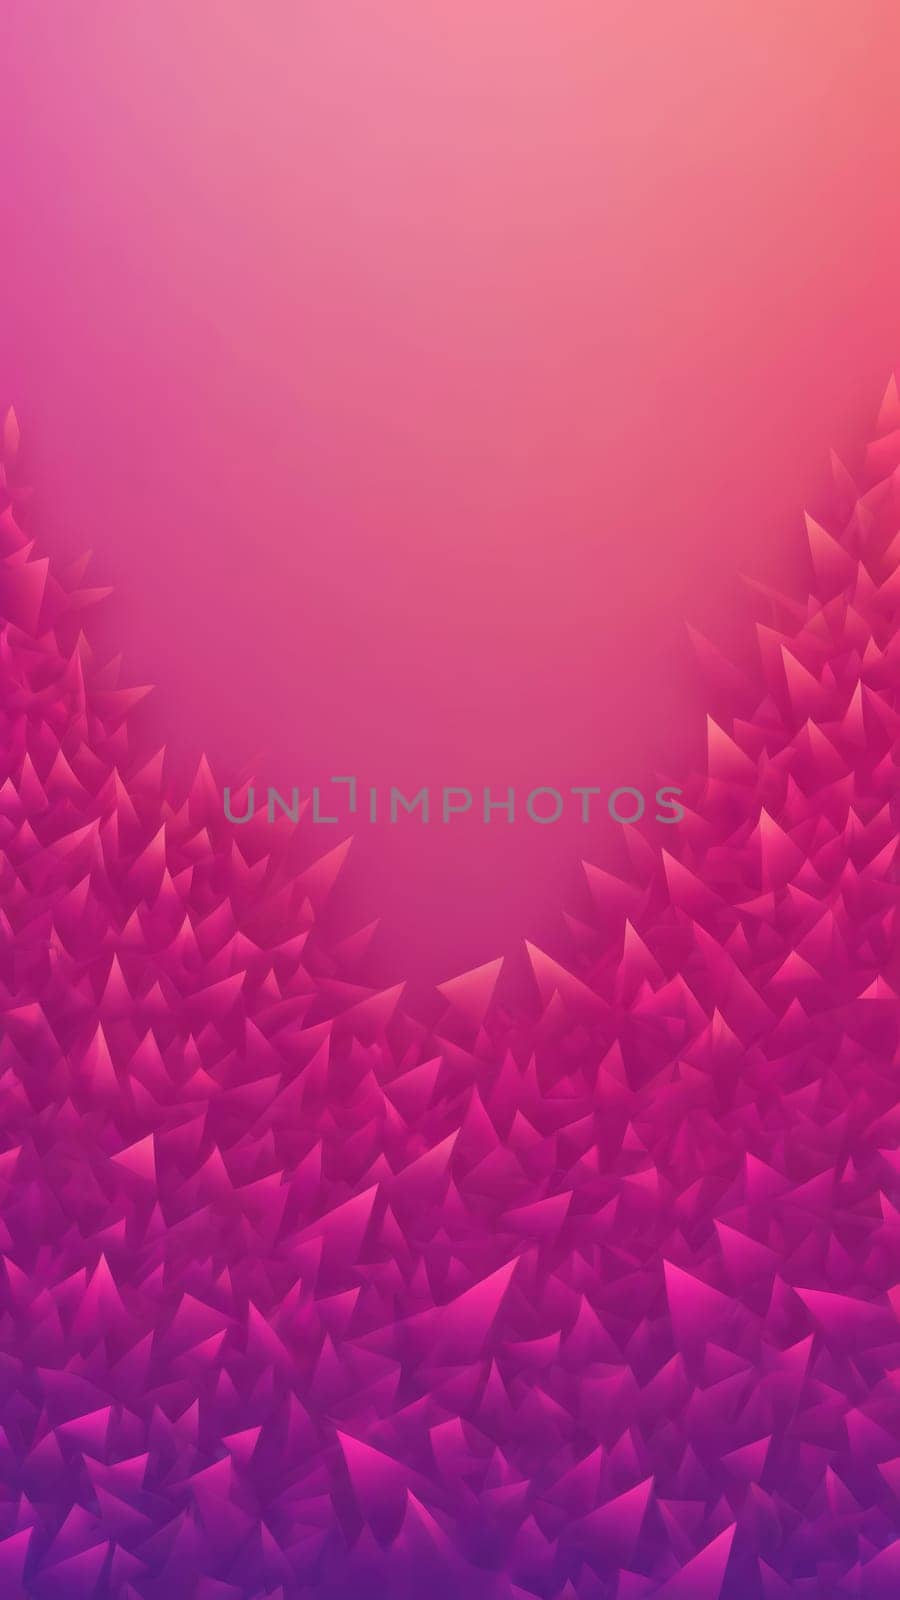 Background from Spiked shapes and fuchsia by nkotlyar